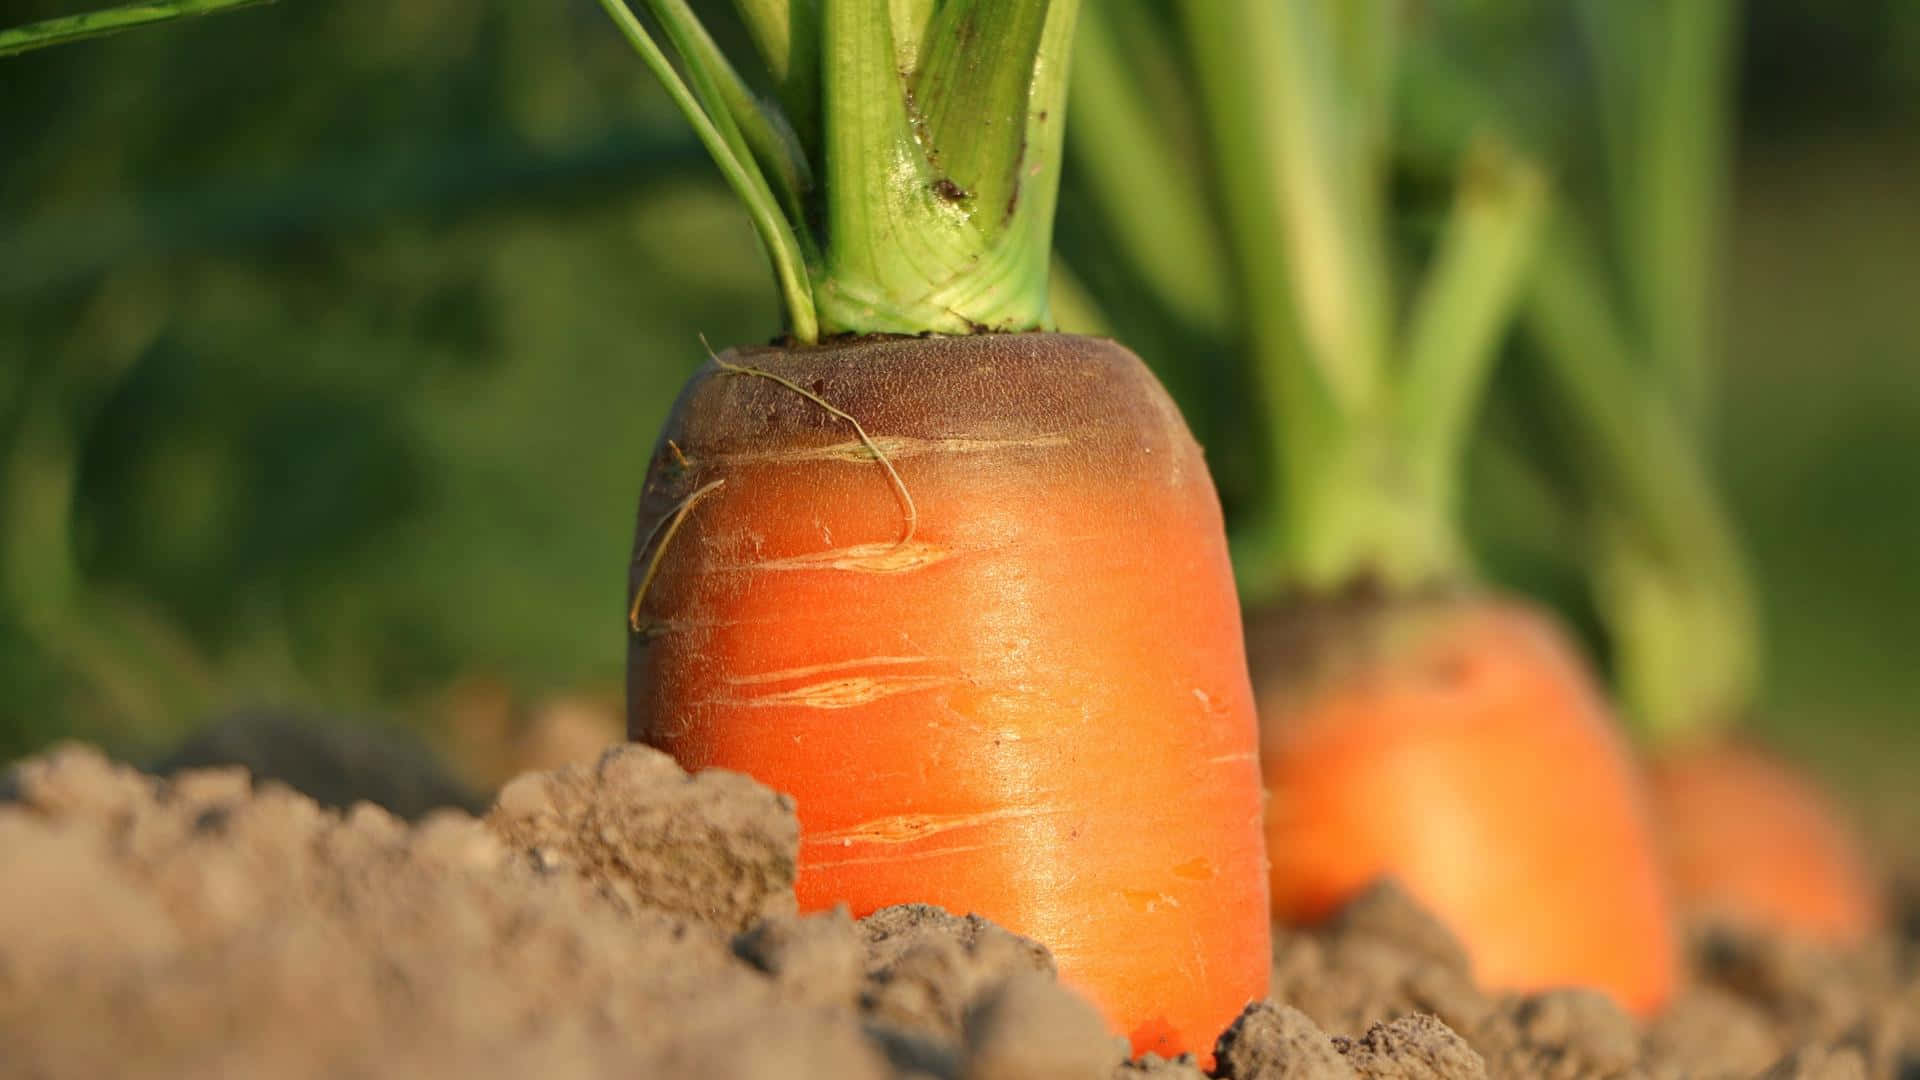 Fresh Carrots - A Healthy, Nutritious Ingredient